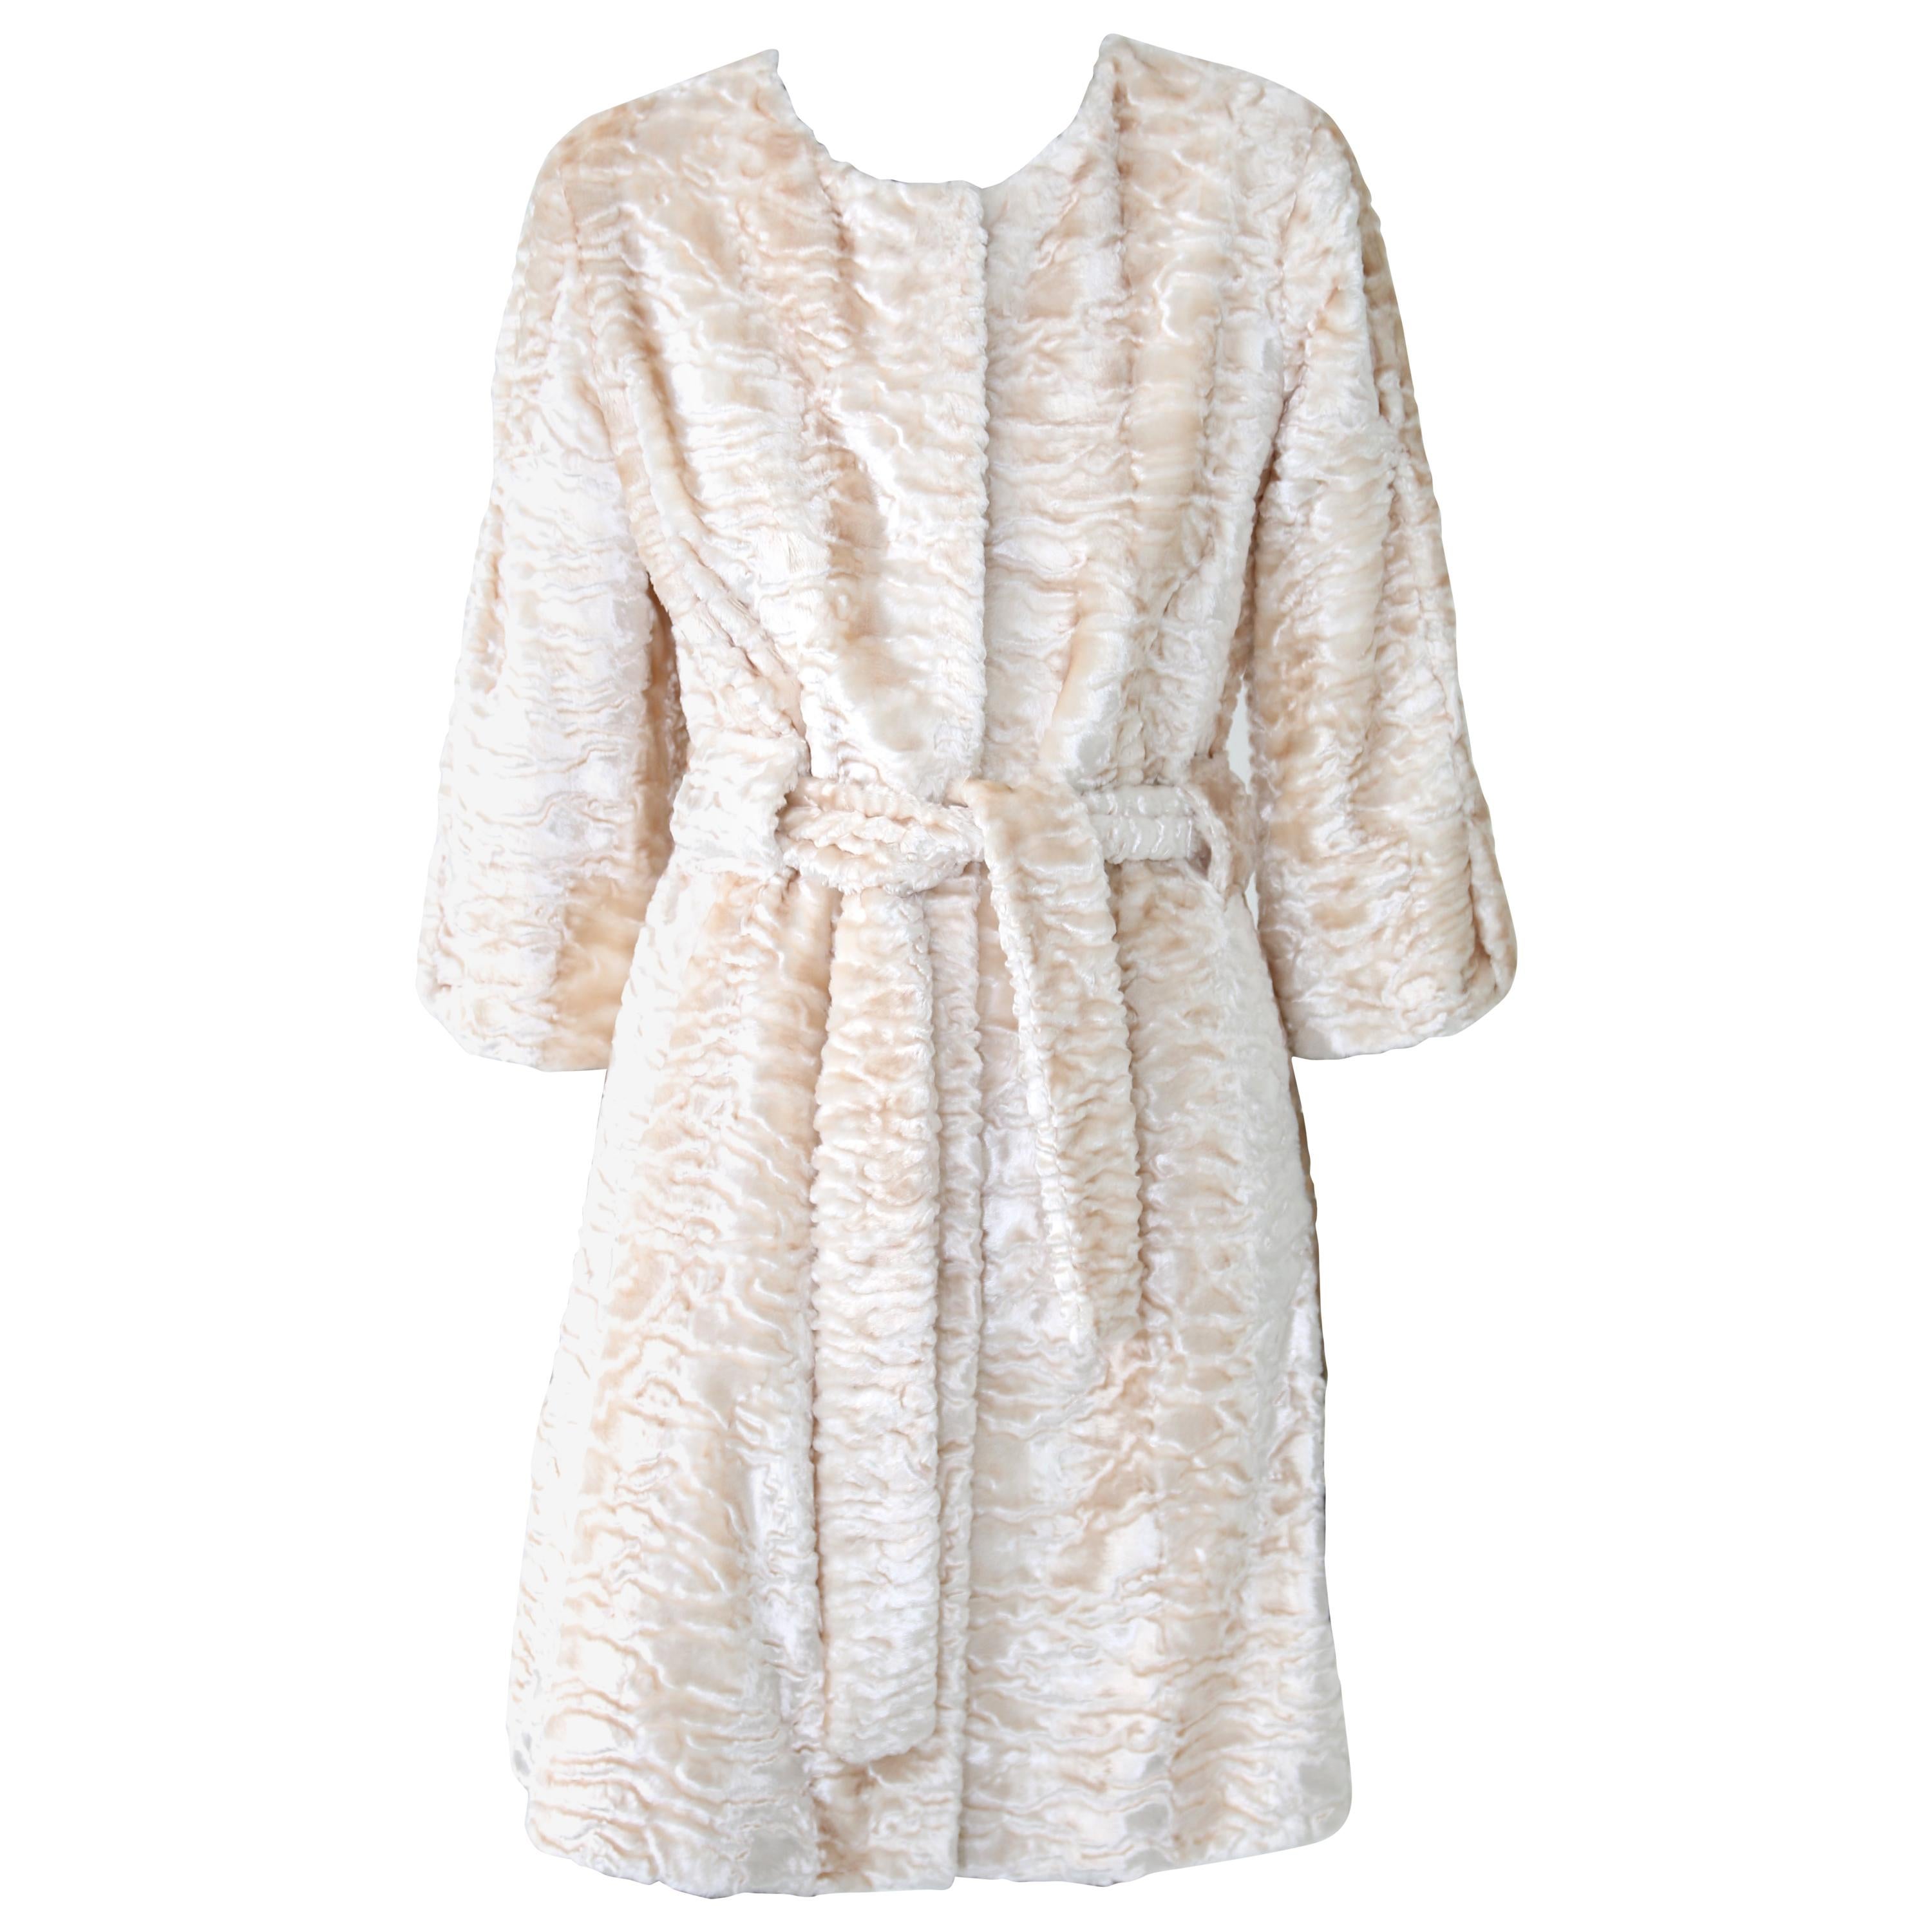 Pelush Ivory Astrakhan Faux Fur Coat With Belt - XS - (1/Small Available)